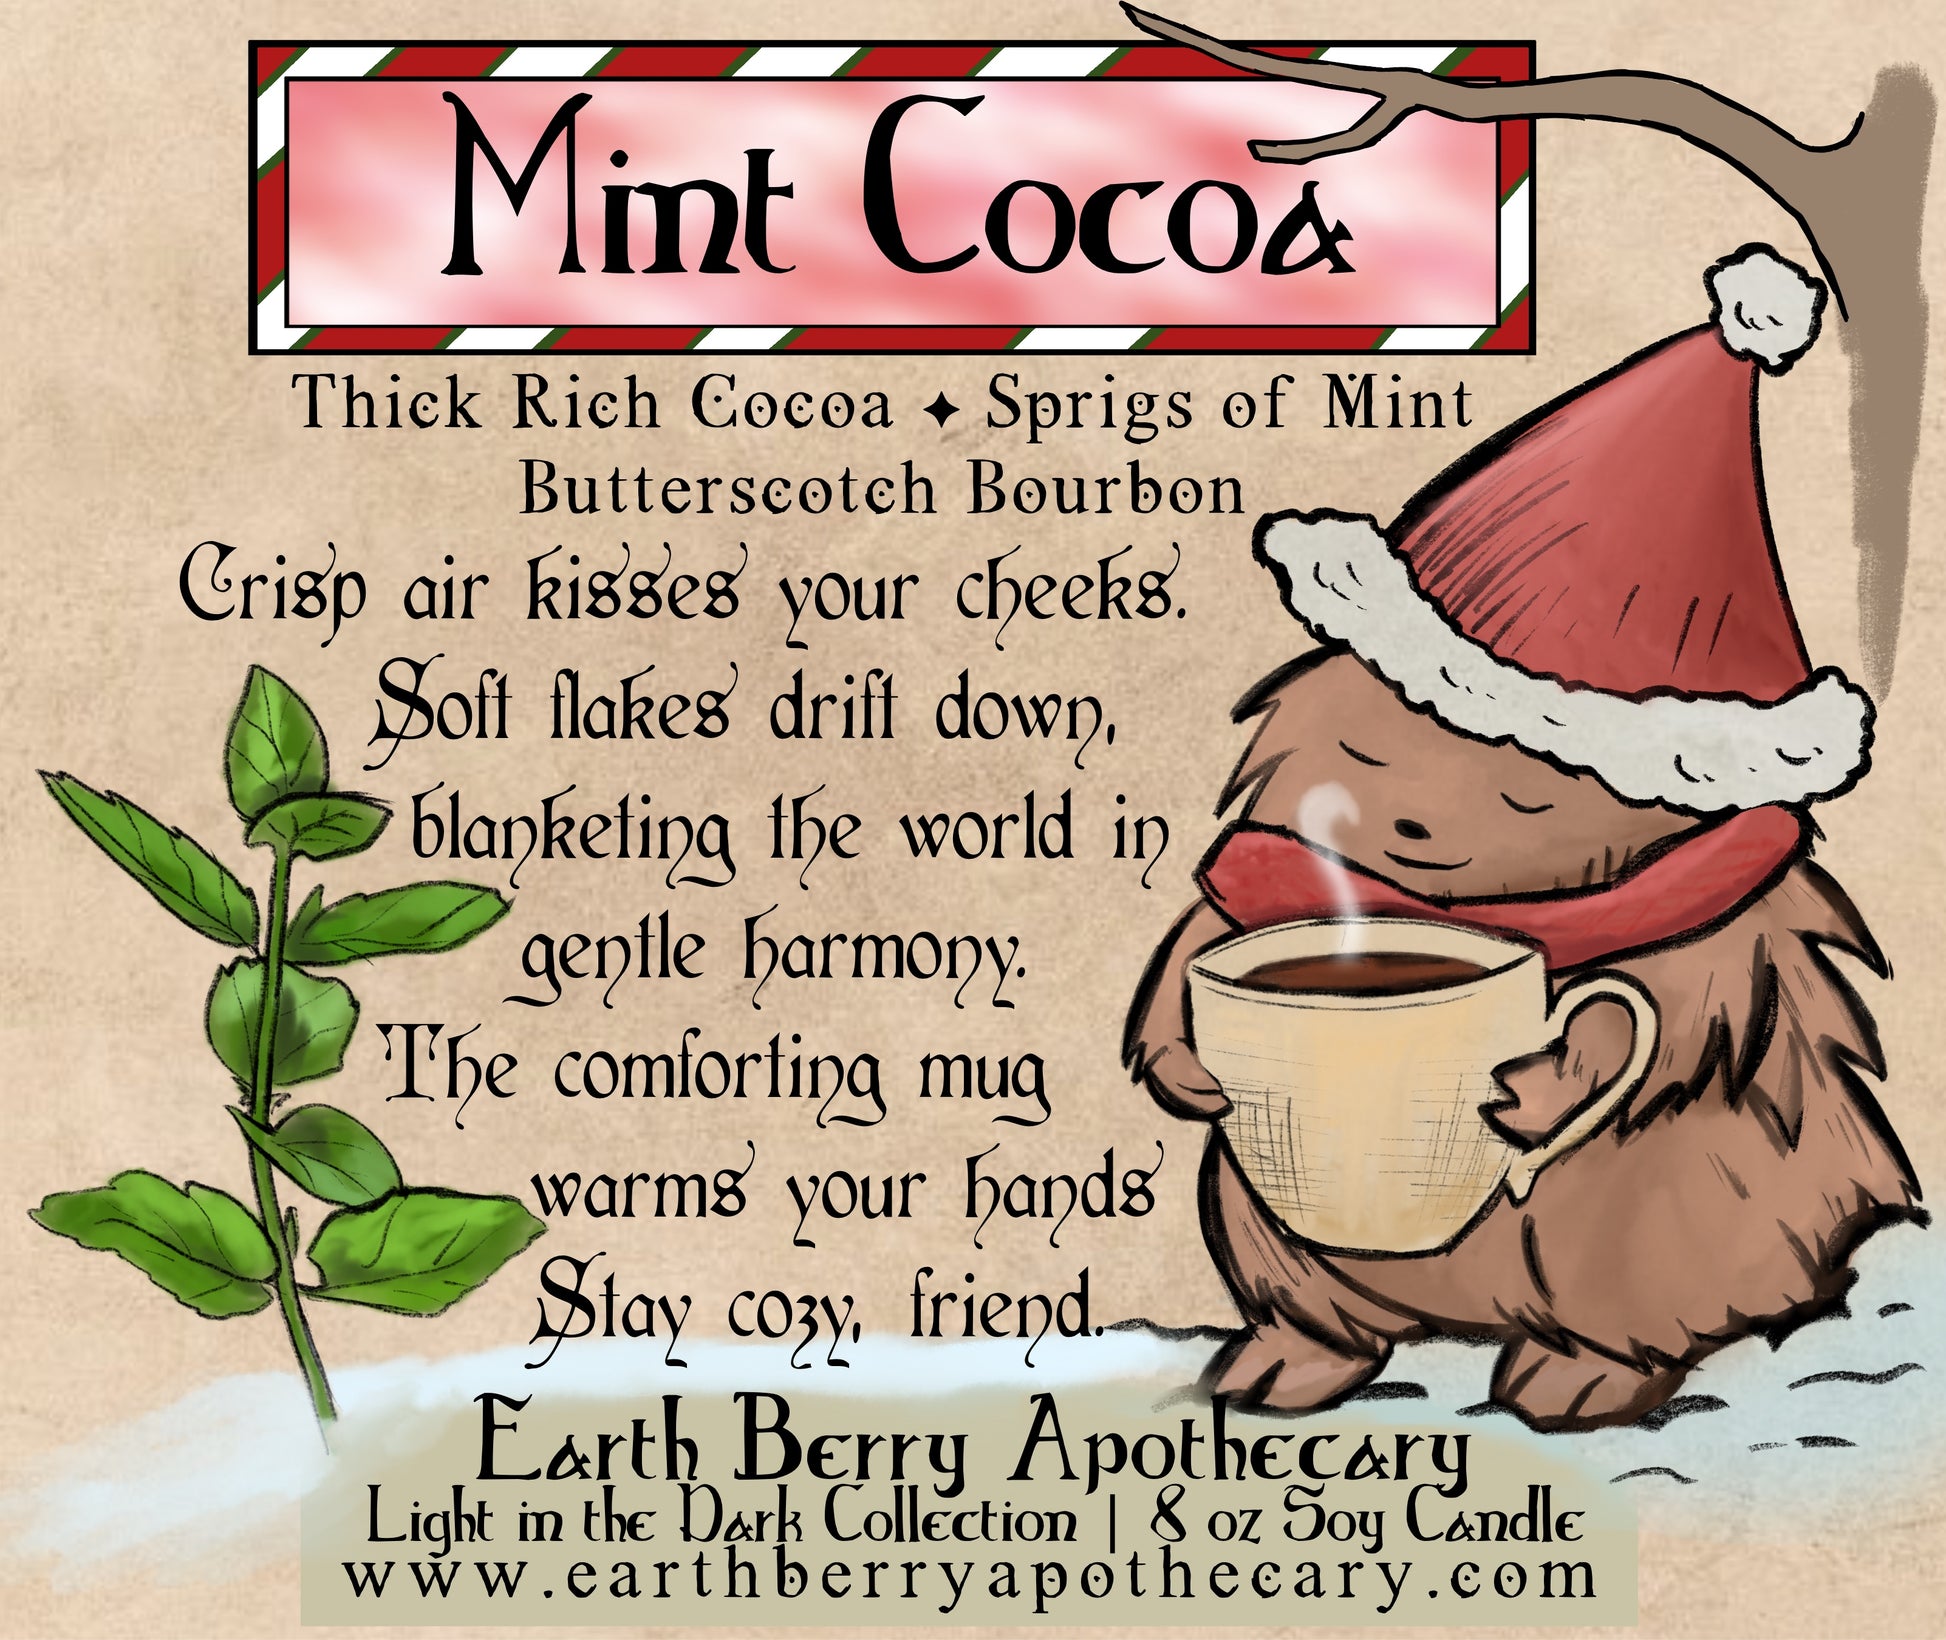 Peppermint Cocoa scented soy candle with bourbon. Always clean burning and nontoxic. A hedgehog holds a hot cup of cocoa, her eyes are closed in cozy warmth. A sprig of mint grows in the snow nearby.